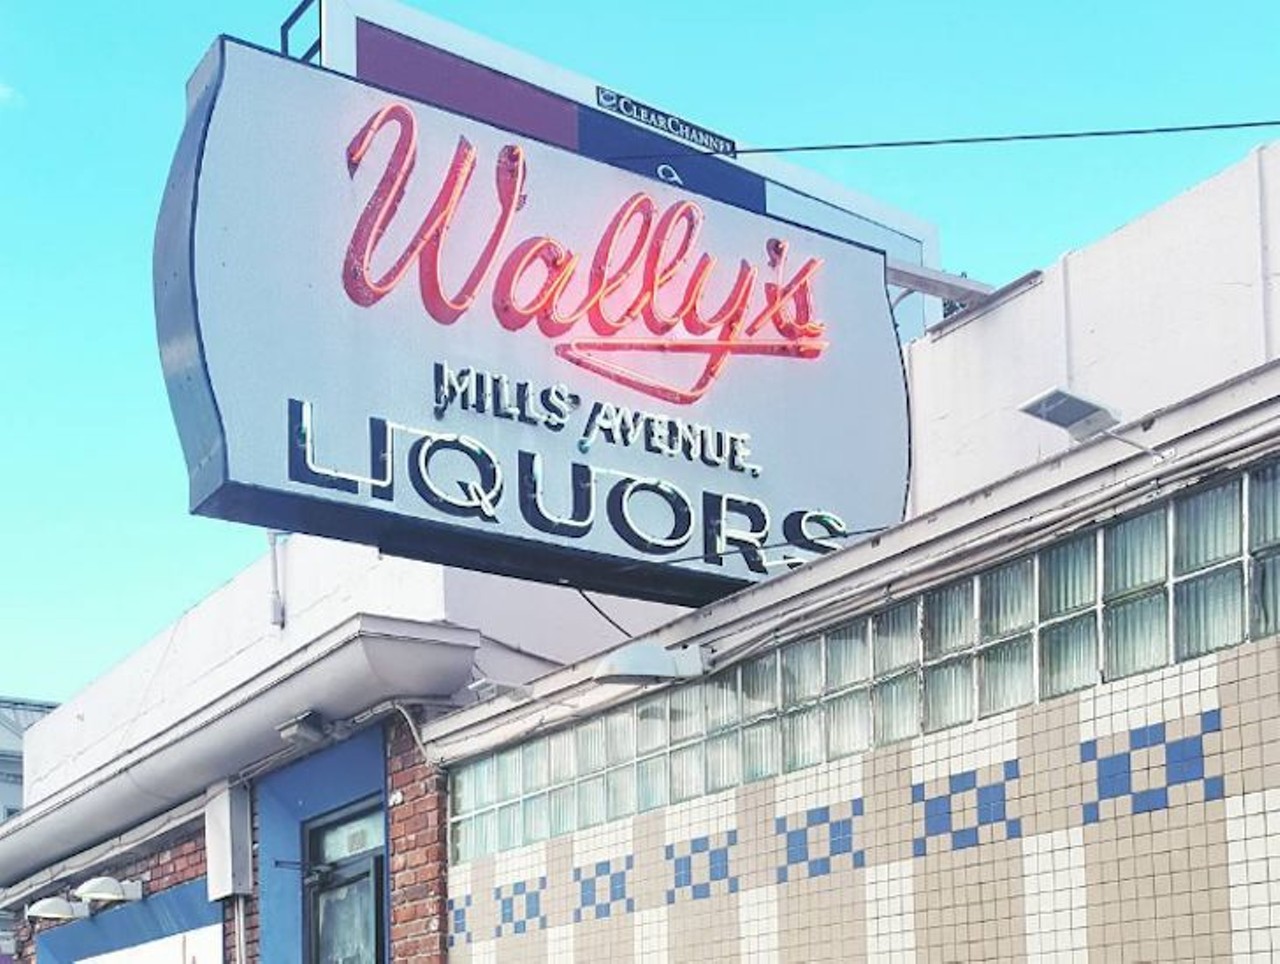 Wally&#146;s Mills Avenue Liquors 
1001 N. Mills Ave., 407-896-6975 
Serving up drinks since 1954, Wally&#146;s has become a staple in the Orlando bar scene for its strong drinks and friendly service. Doors open at 7:30 a.m.  
Photo via j.banger/Instagram